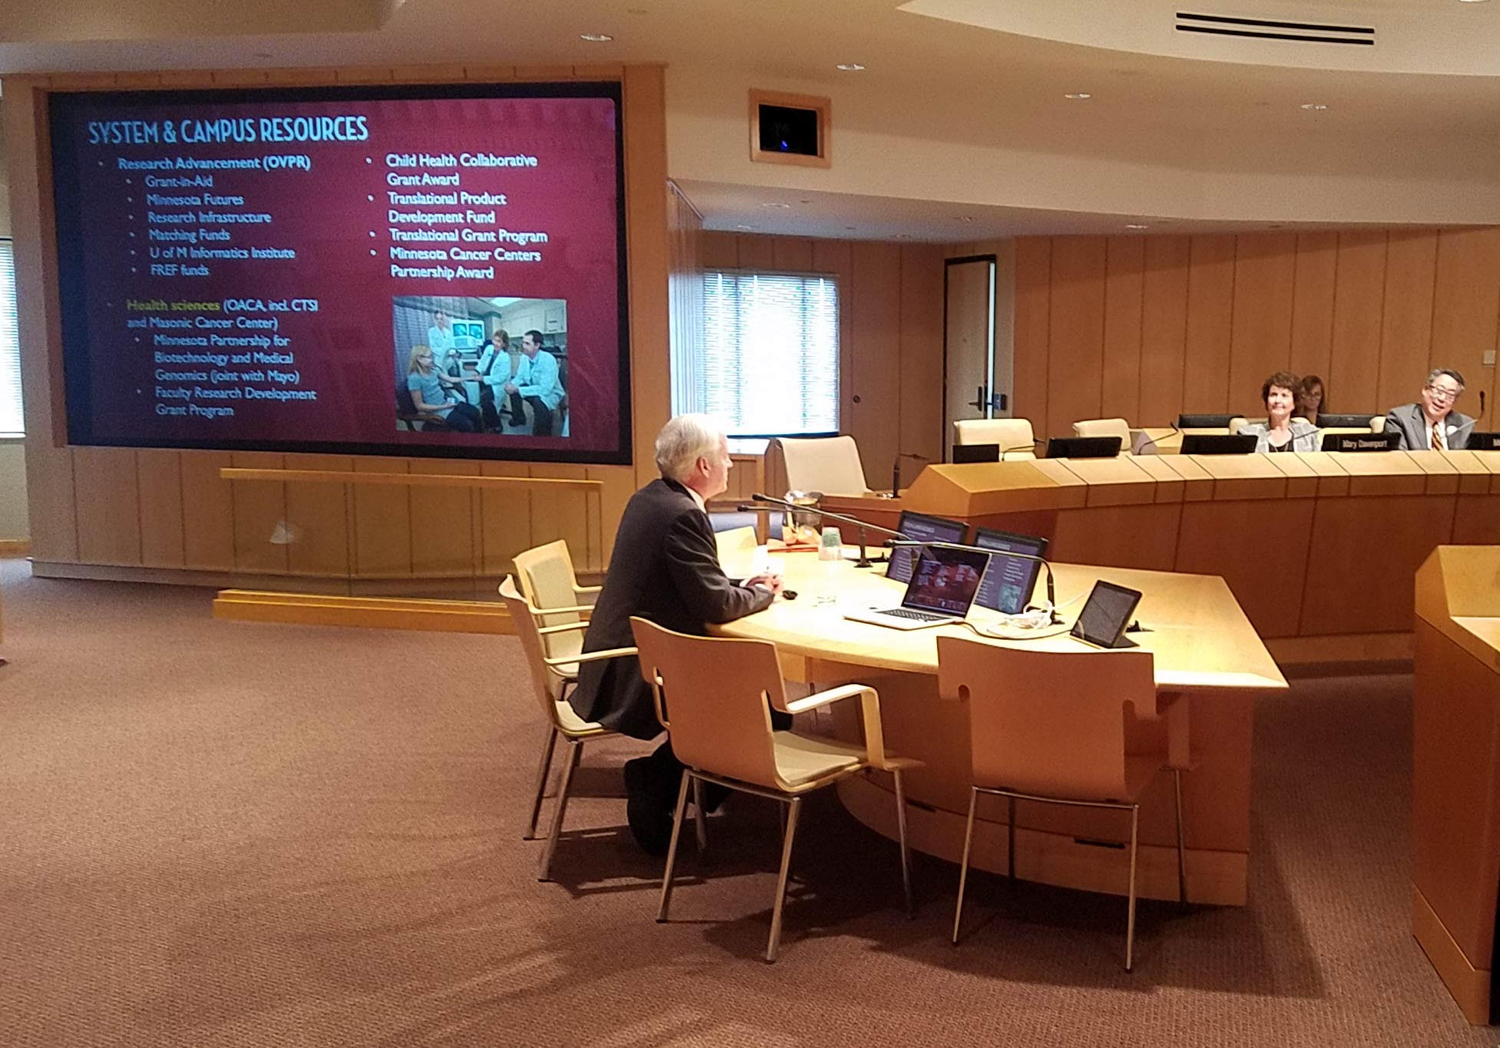 VPR Cramer sits at a table to present at the October 11 Board of Regents meeting. Slide from his presentation is projected behind him.